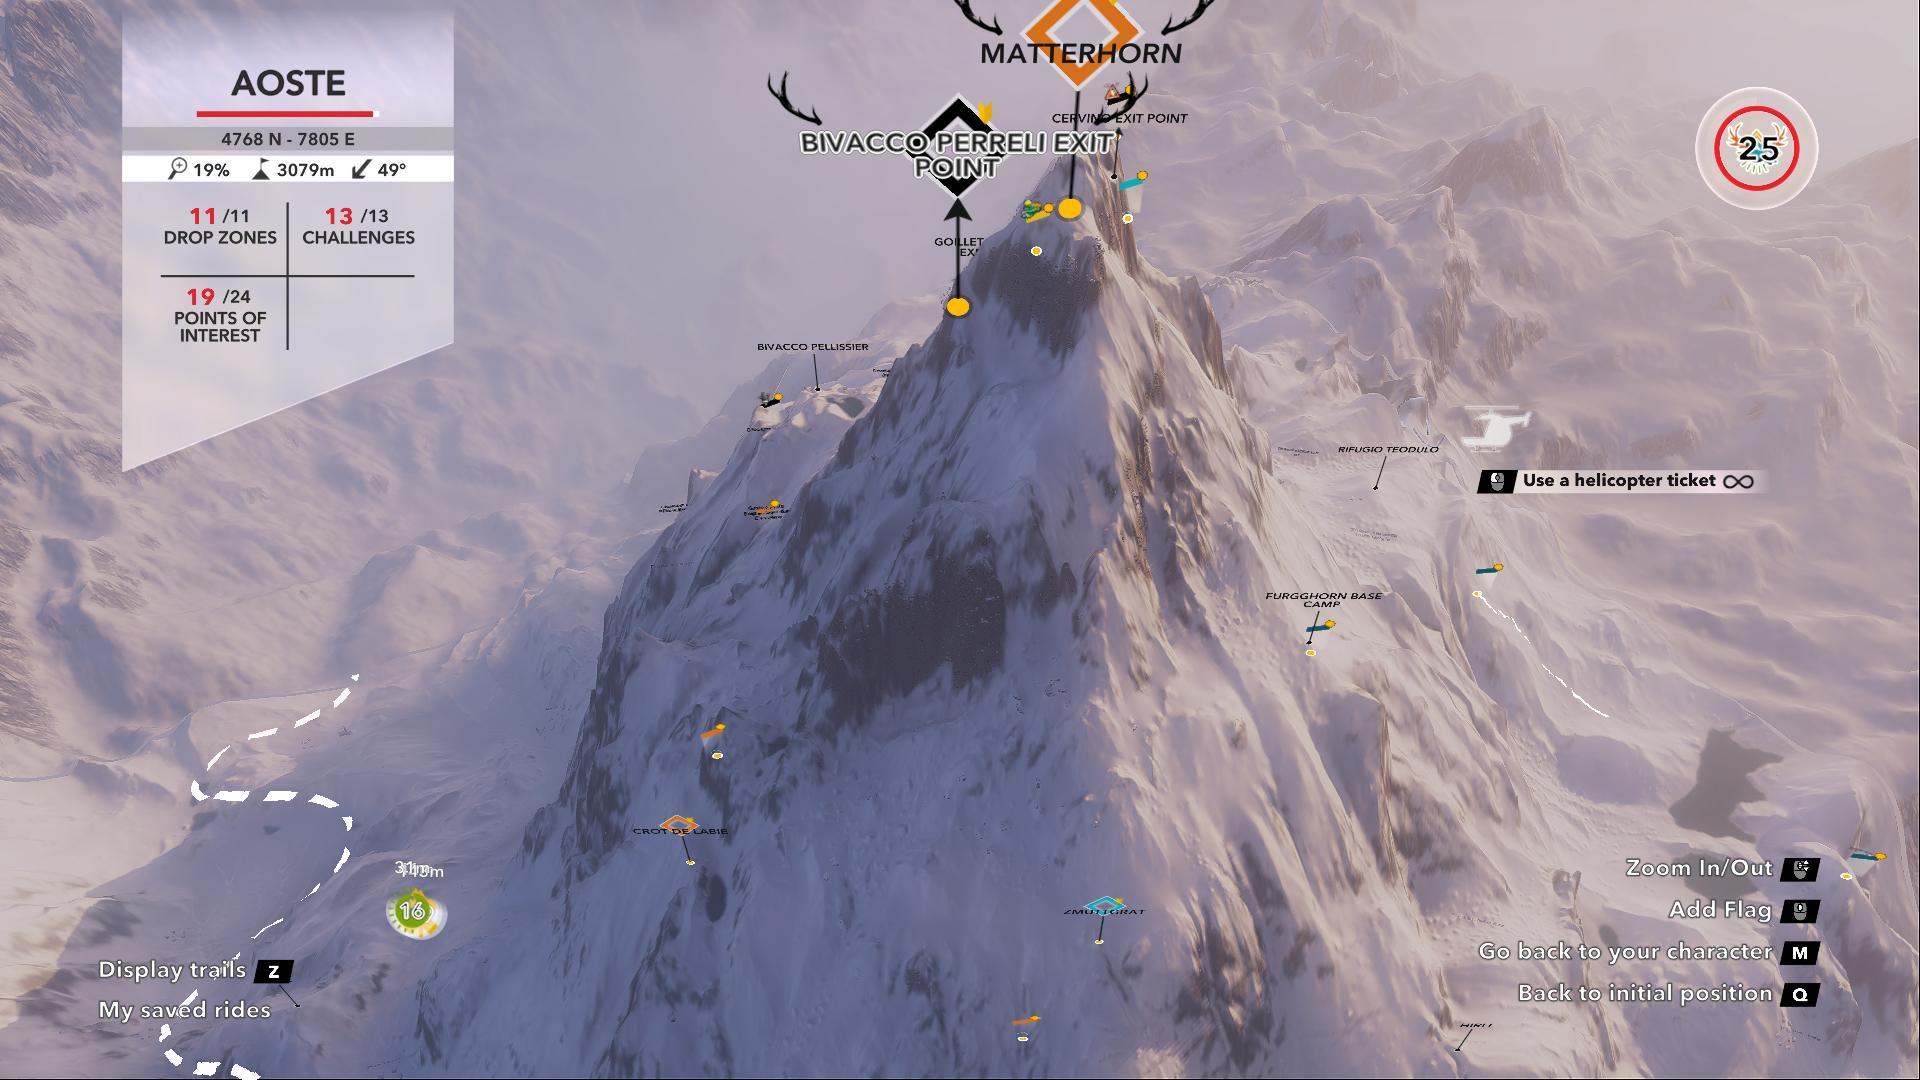 Steep - All Coordinates for Mountain Stories, Drop Zones and Points of